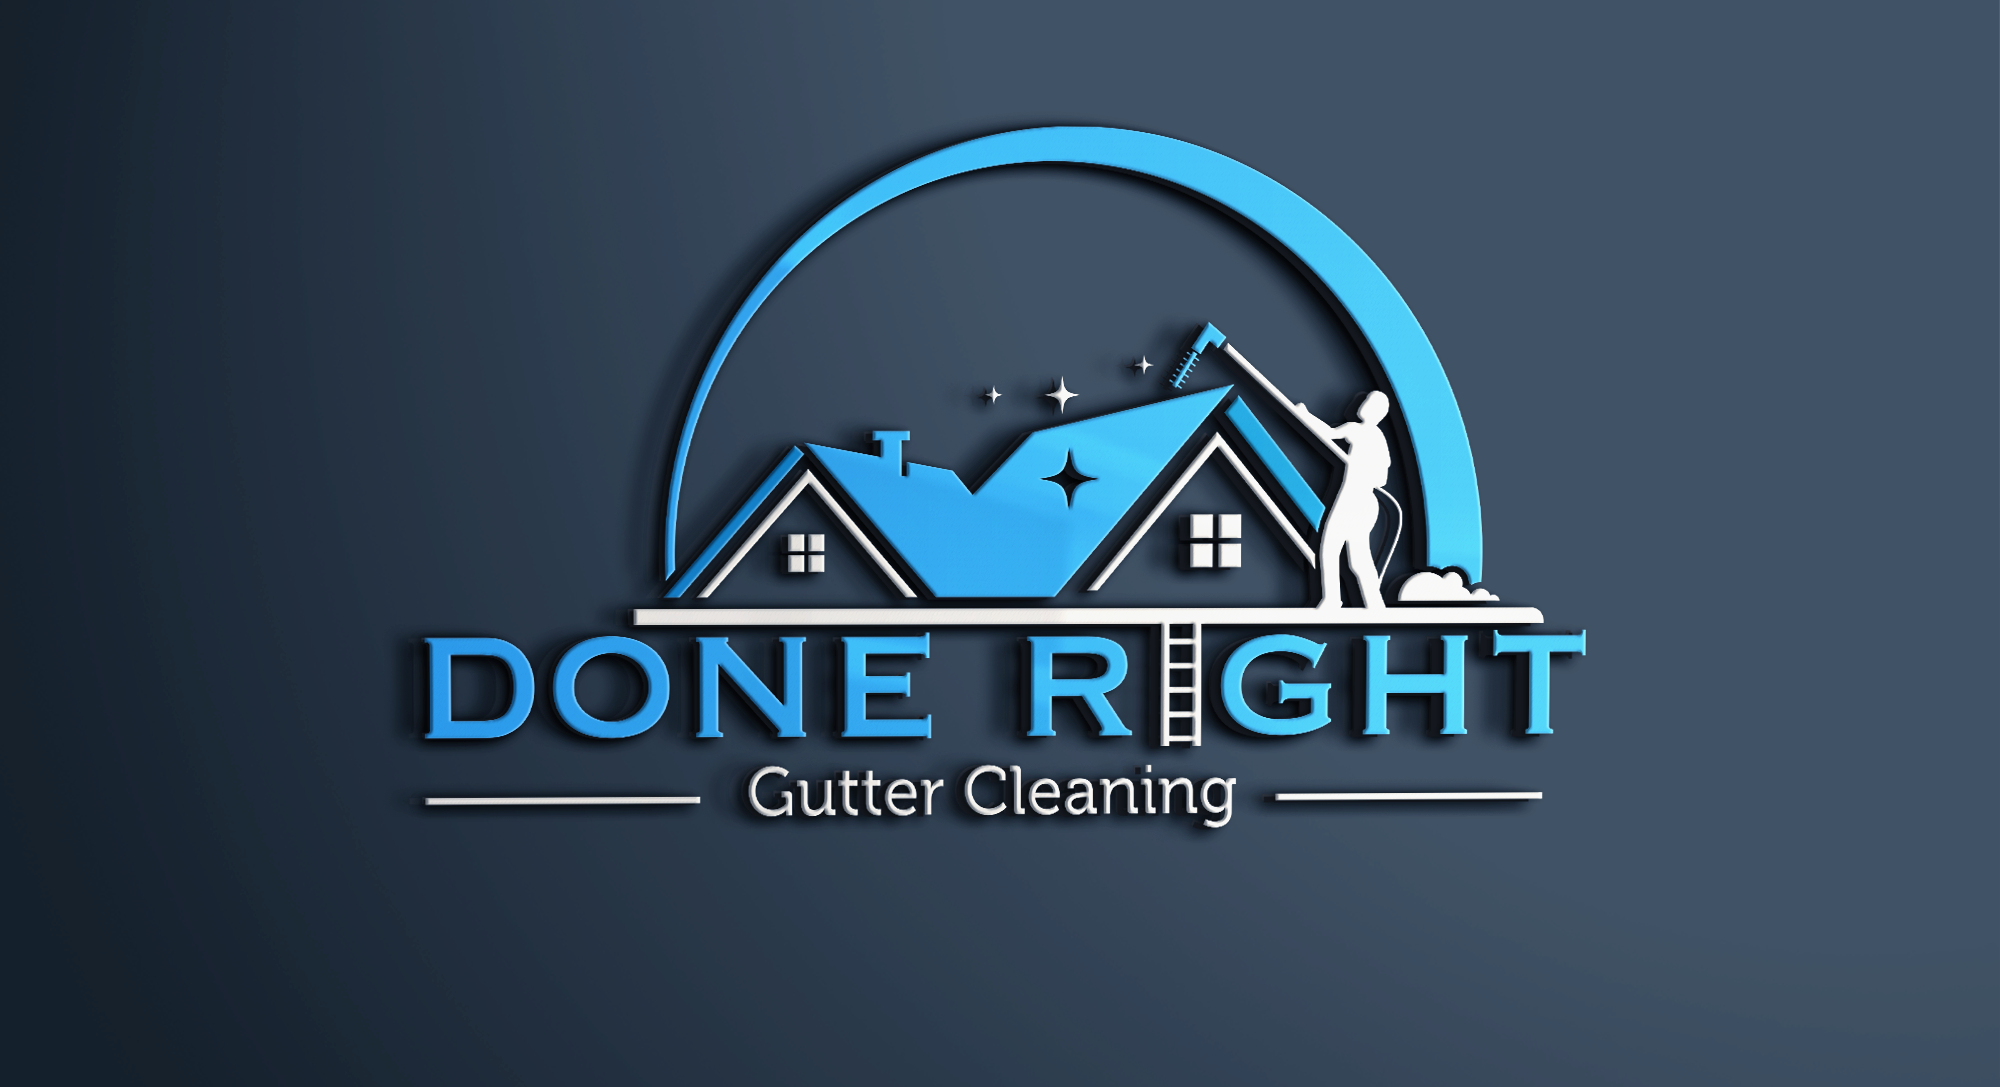 Done Right Gutter Cleaning Logo